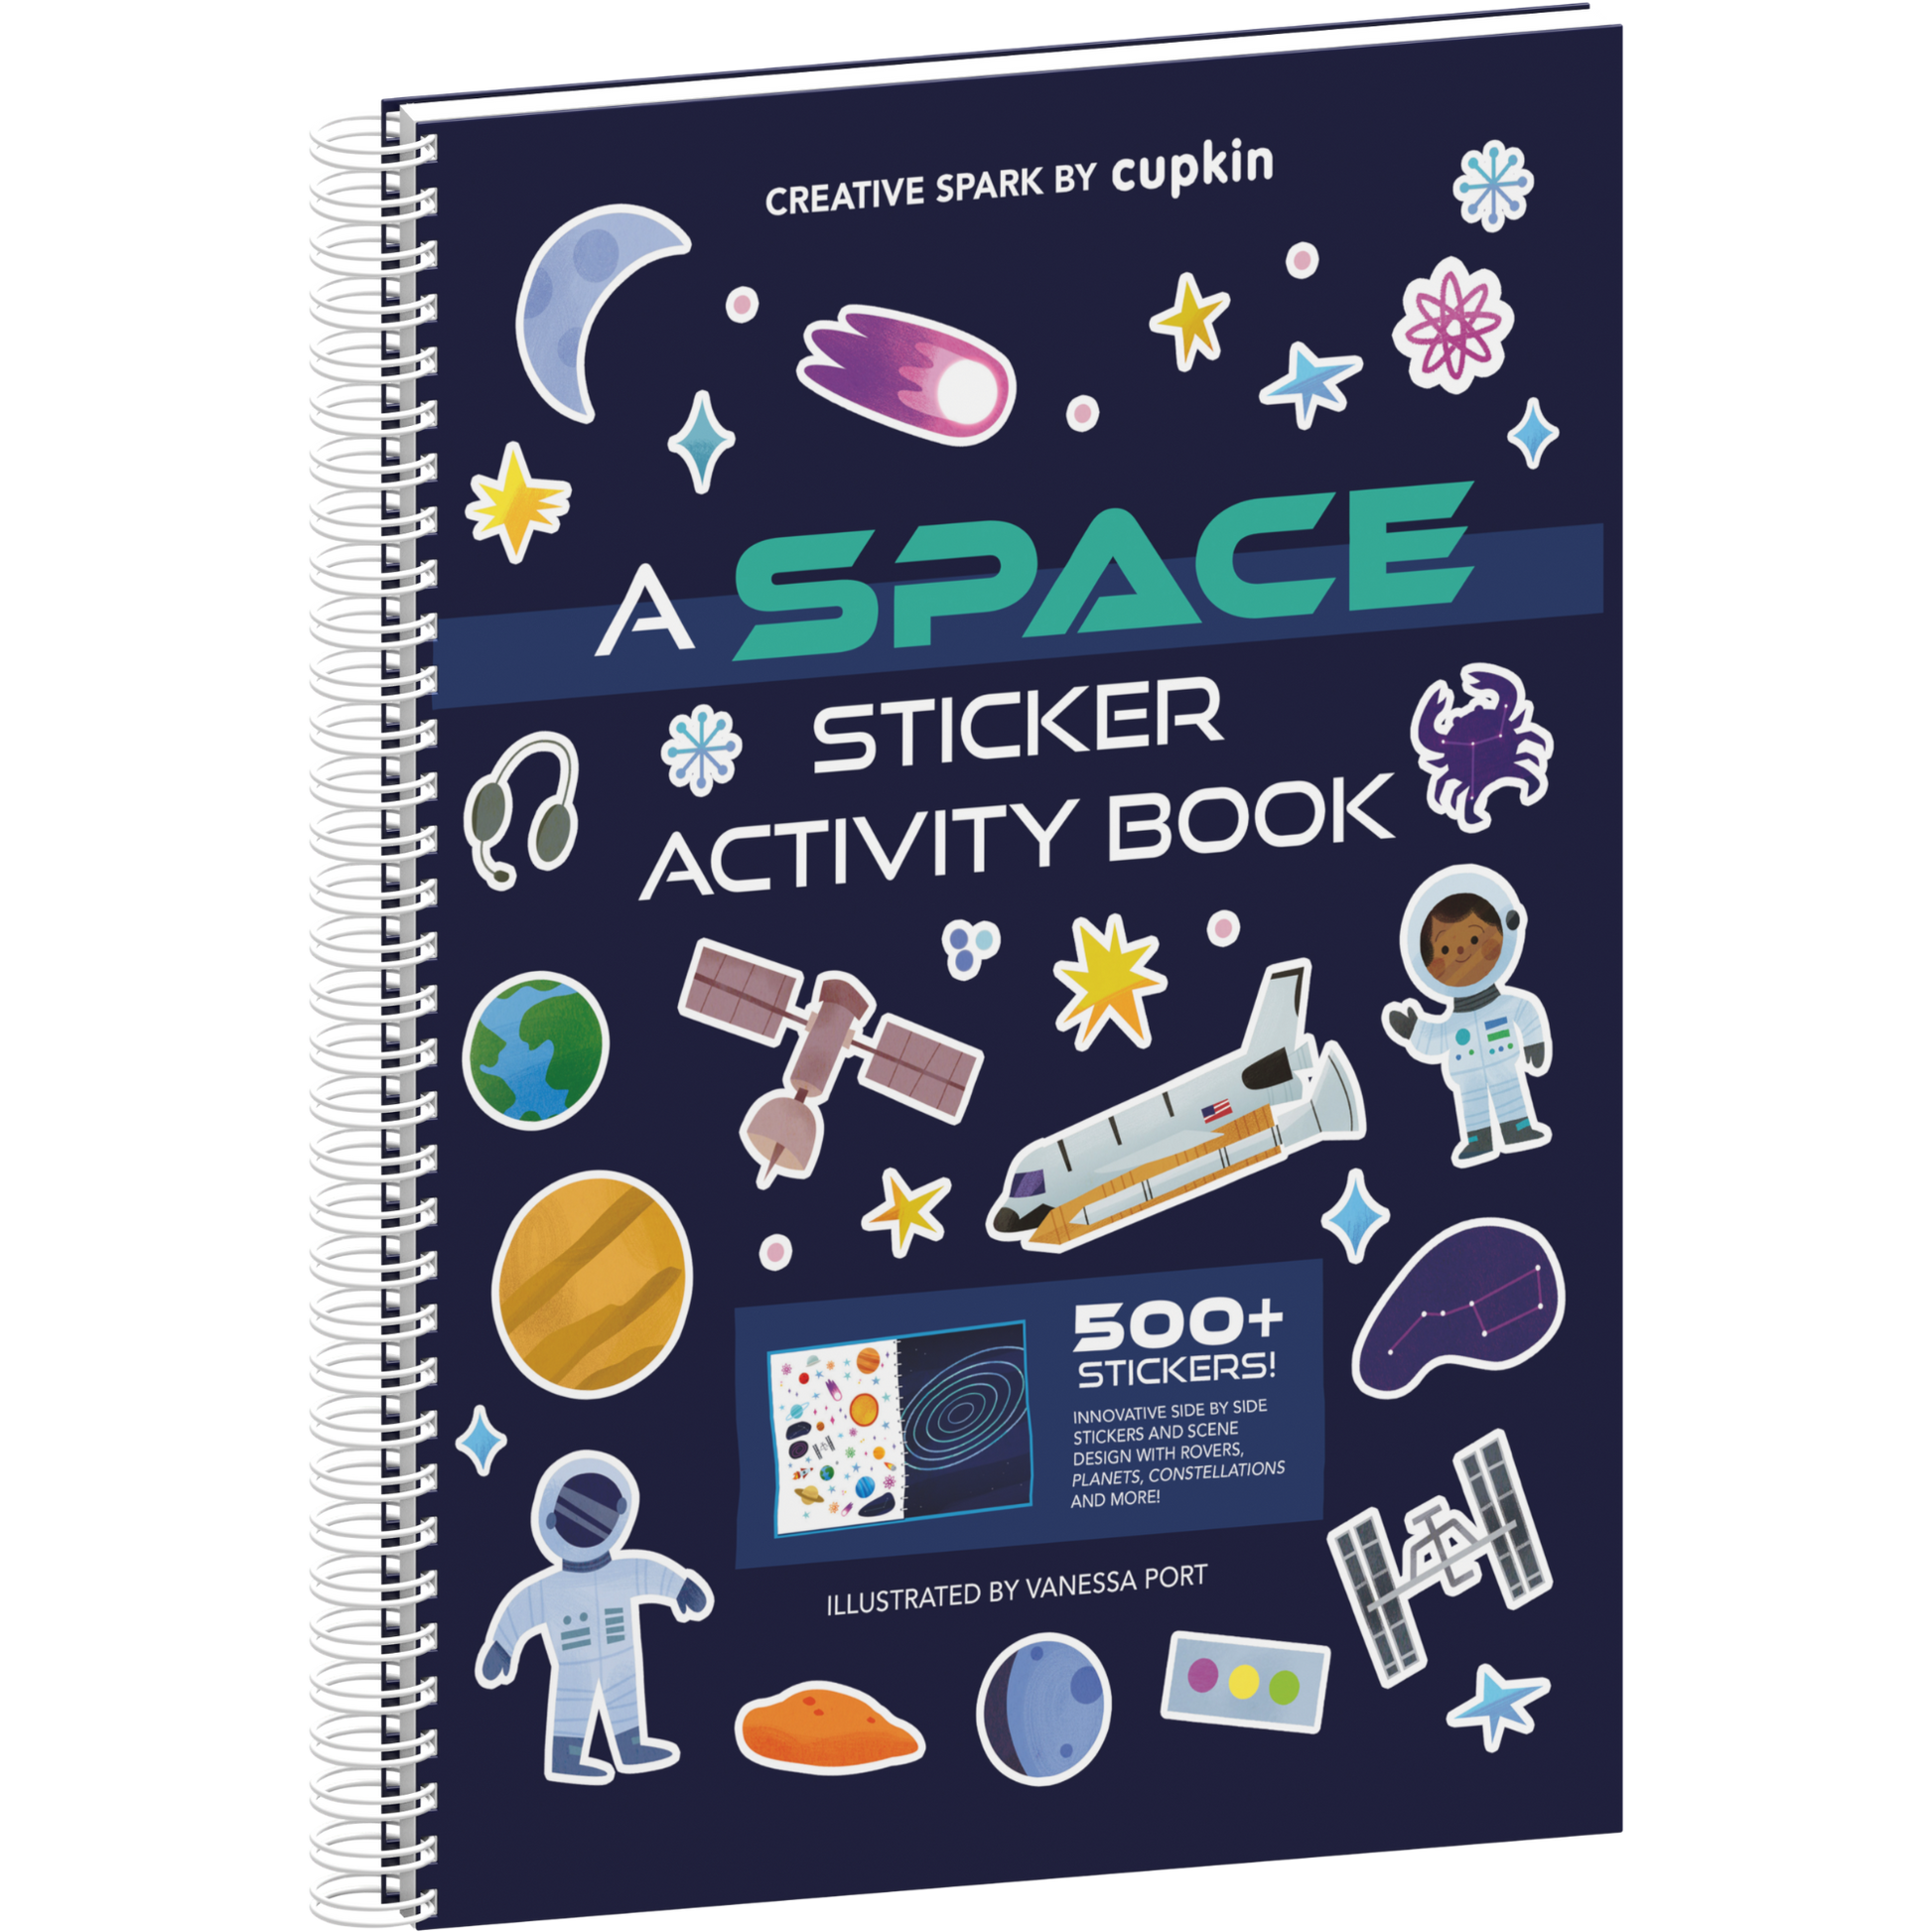 Sticker Book Collecting Album - Space Theme: Sticker Collection